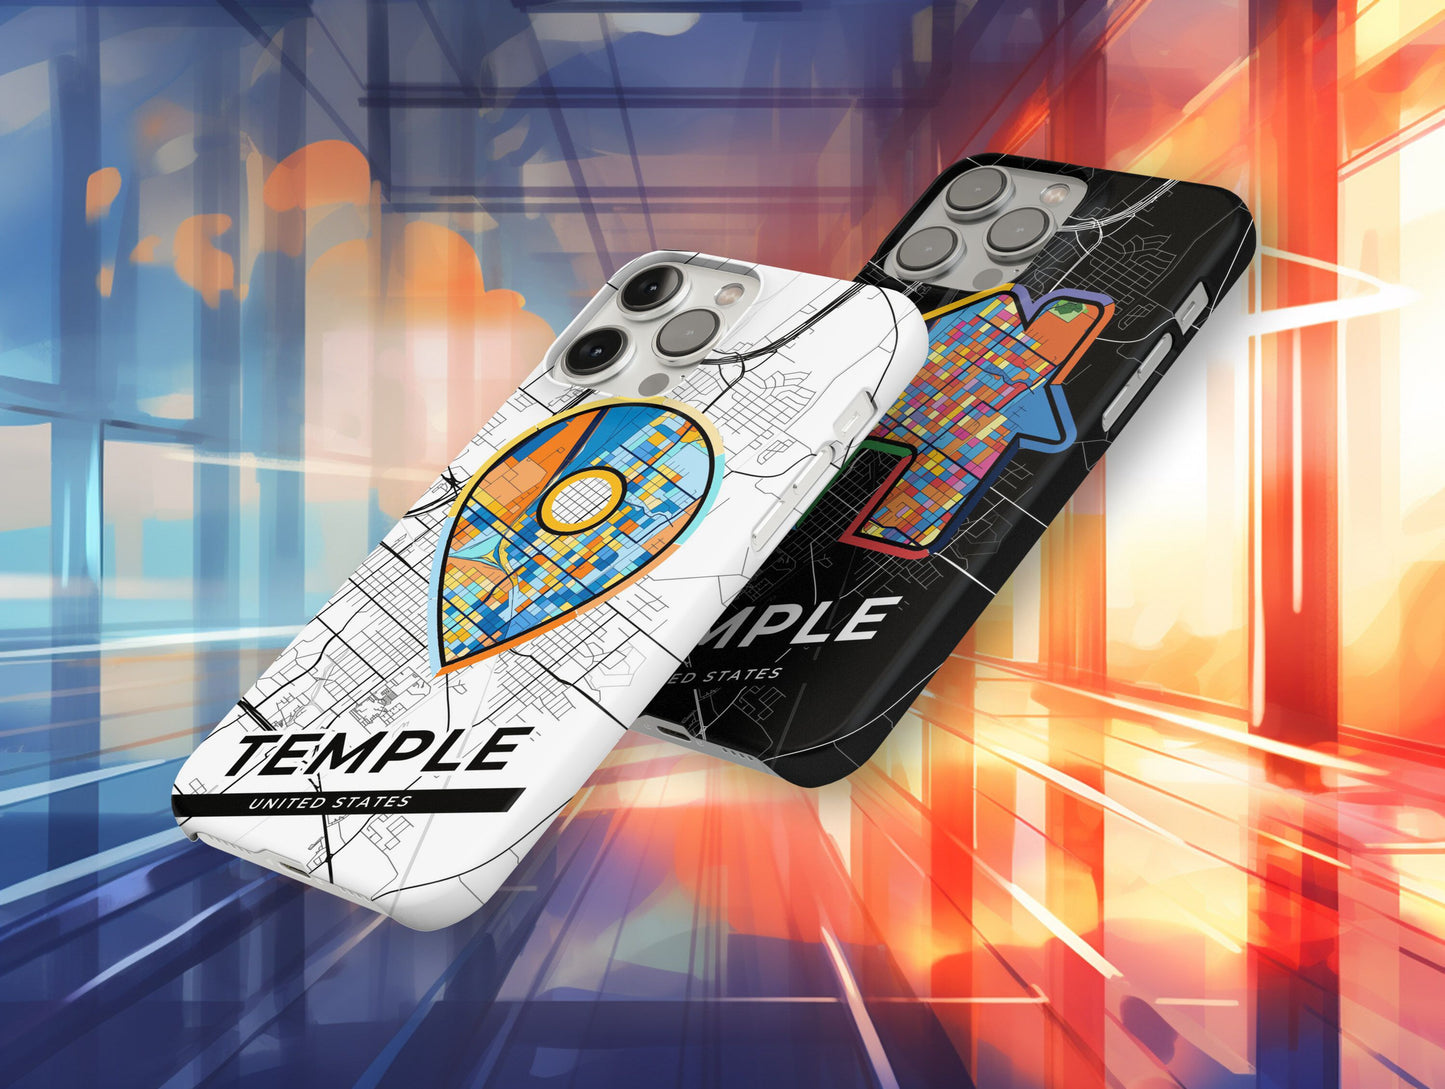 Temple Texas slim phone case with colorful icon